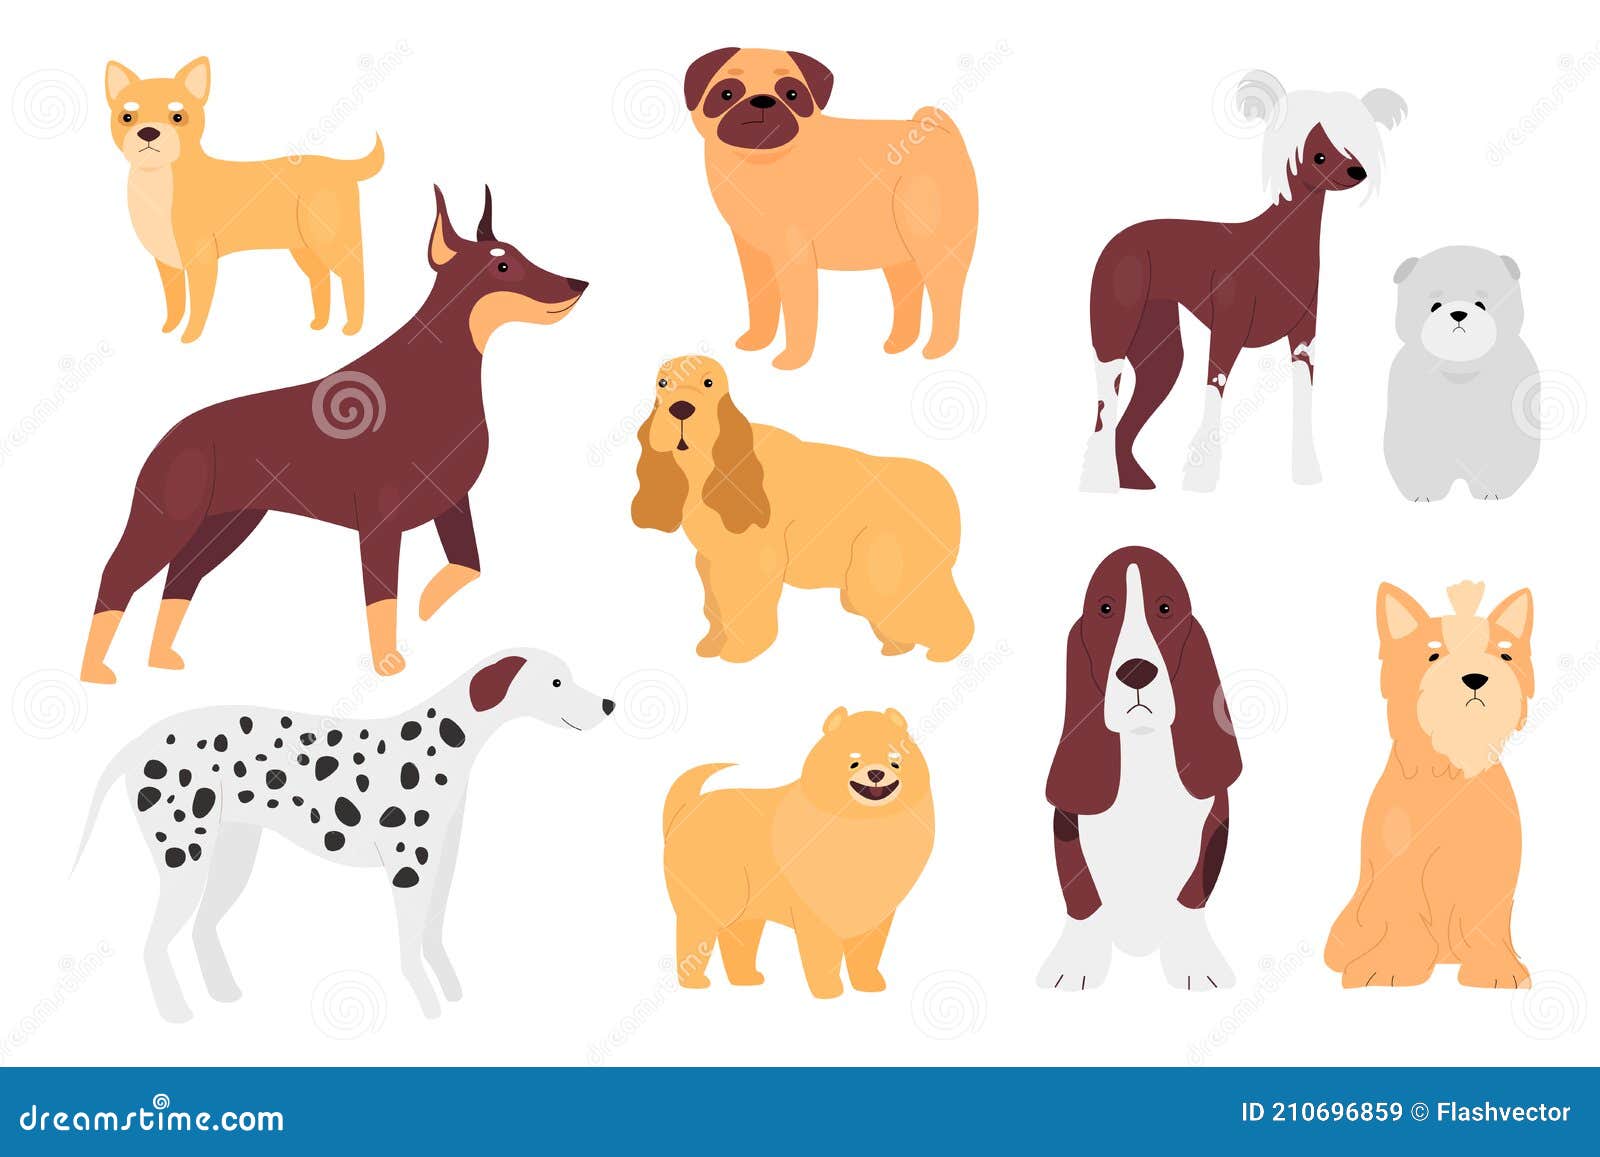 Dog Pet Set, Cartoon Doggy of Different Breeds Sitting and Standing in  Different Poses Stock Vector - Illustration of animal, yorkshire: 210696859